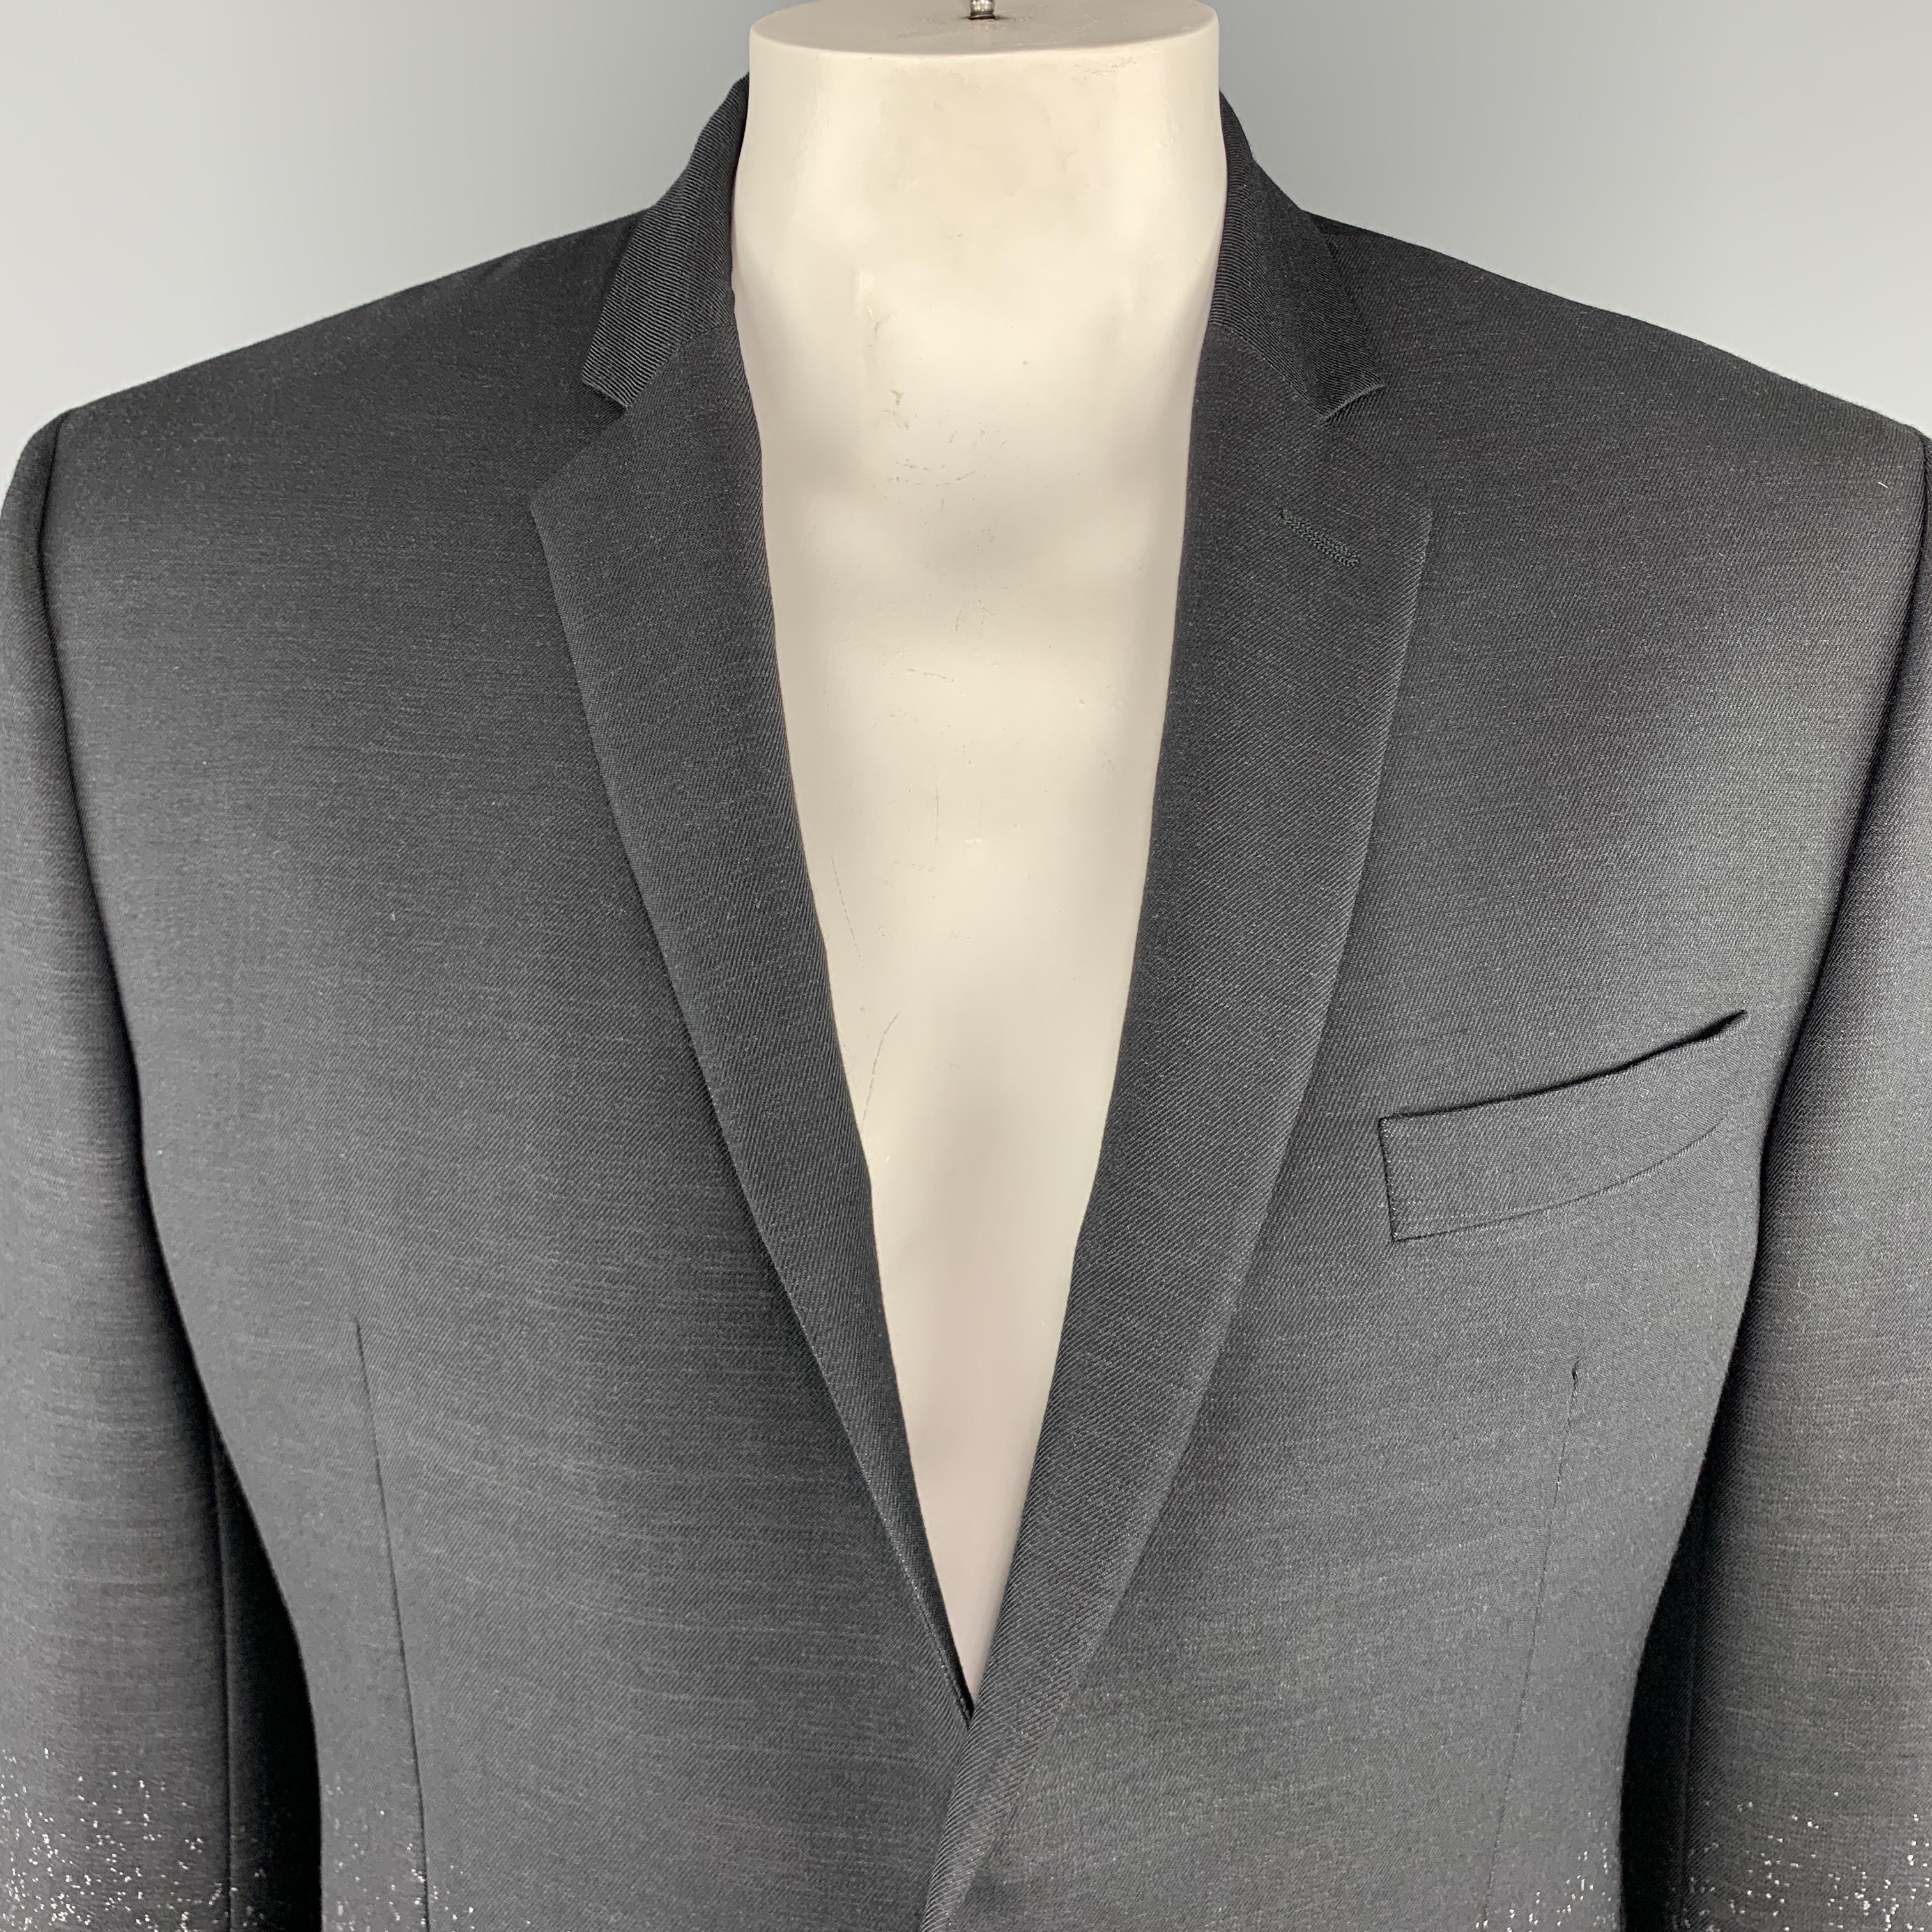 VERSACE - COLLECTION Sport Coat comes in black and grey tones in an ombre wool material, with a notch lapel, slit and flap pockets, two buttons at closure, single breasted, and buttoned cuffs.

Excellent Pre-Owned Condition.
Marked: